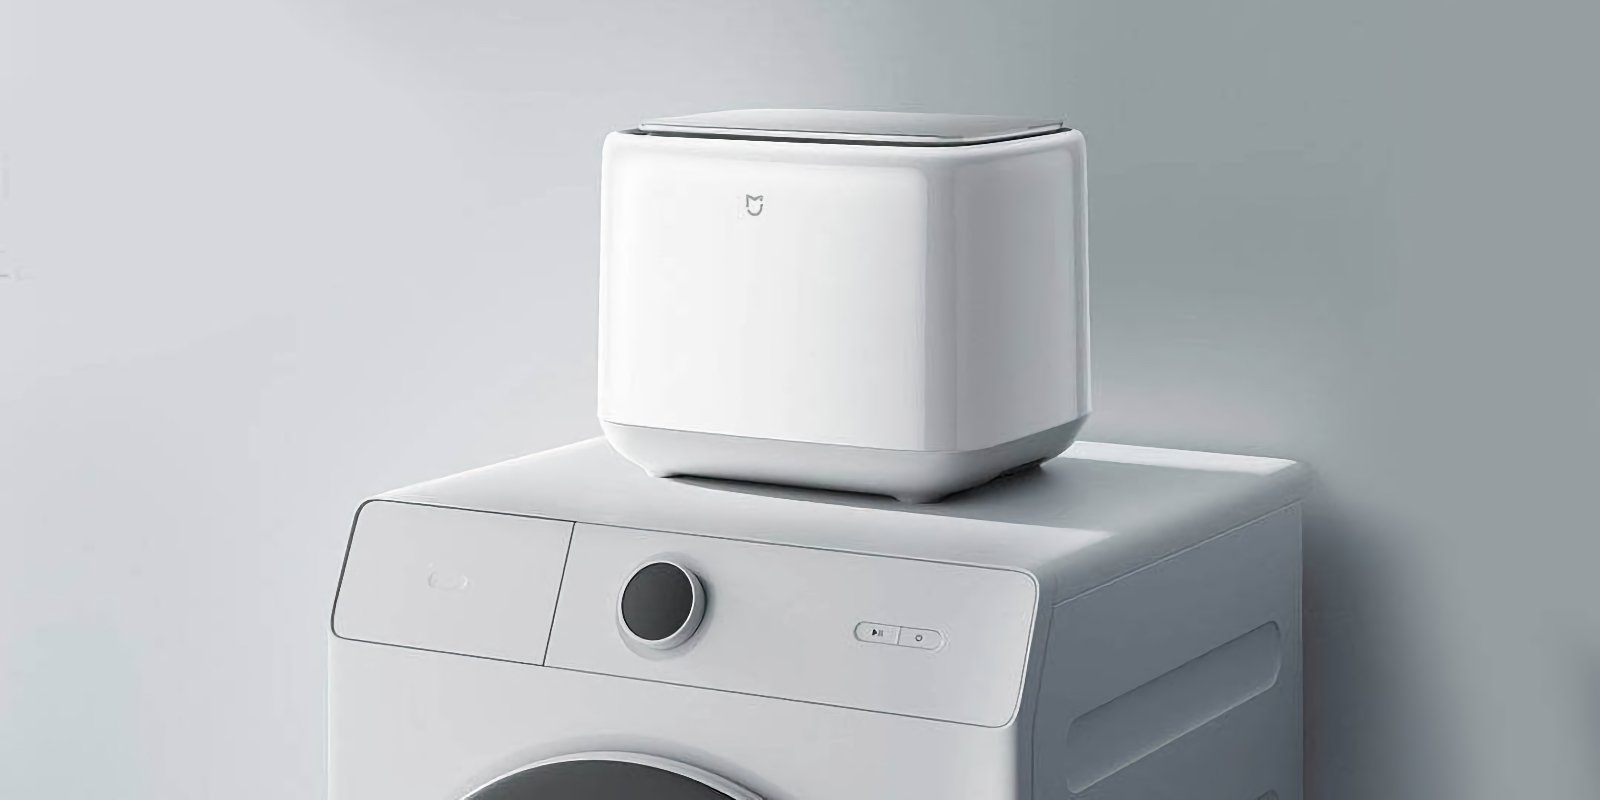 Xiaomi introduced a compact washing machine and treadmill with NFC